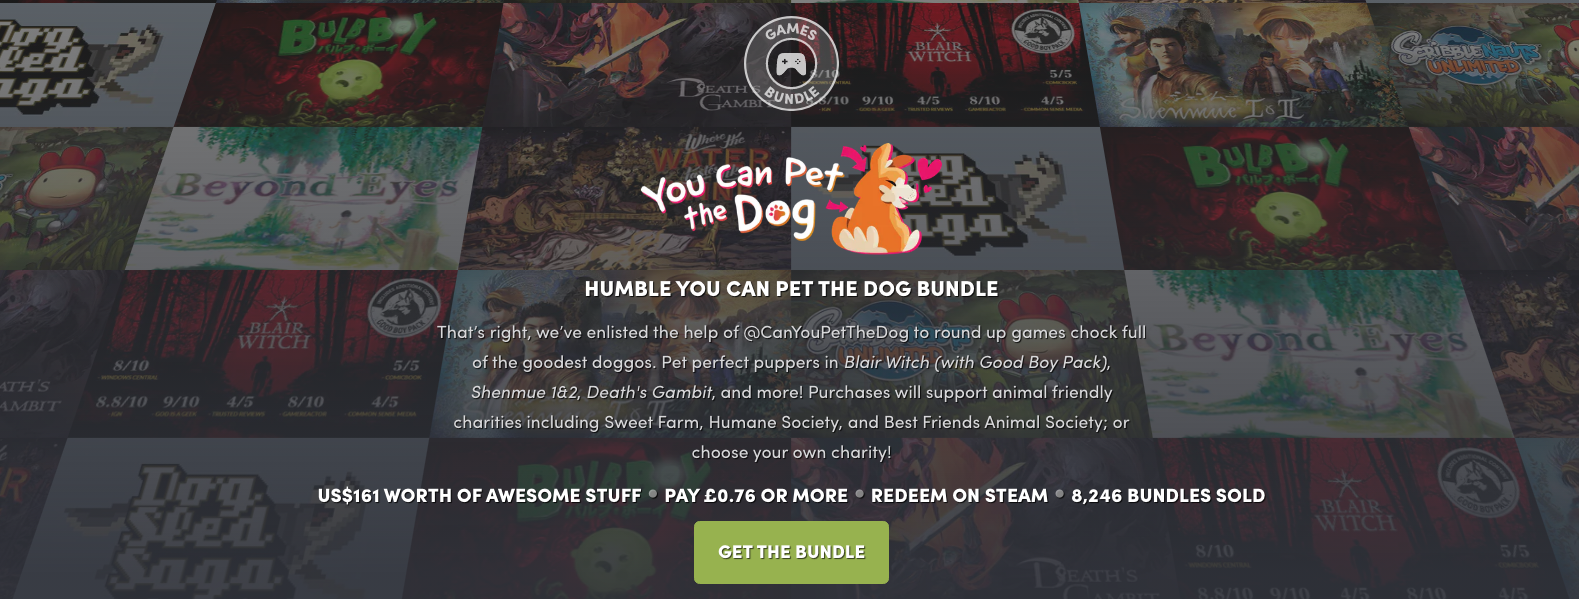 Humble S You Can Pet The Dog Bundle Is Exactly What It Sounds Like Wilson S Media - stock market simulator pets roblox